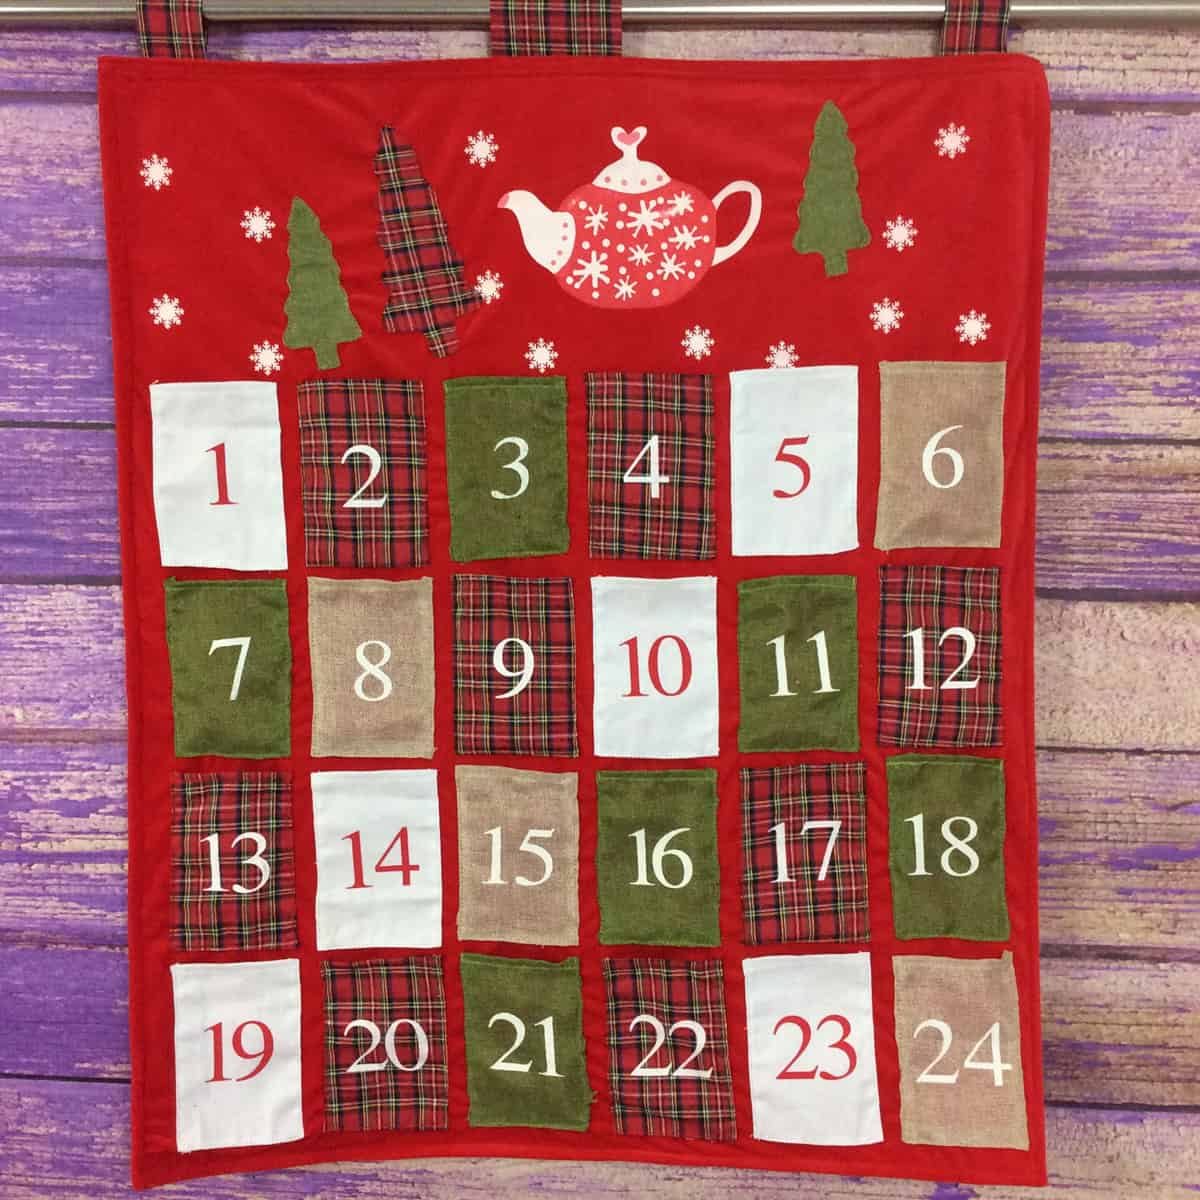 Plum Deluxe Tea Advent Calendar Reviews Get All The Details At Hello